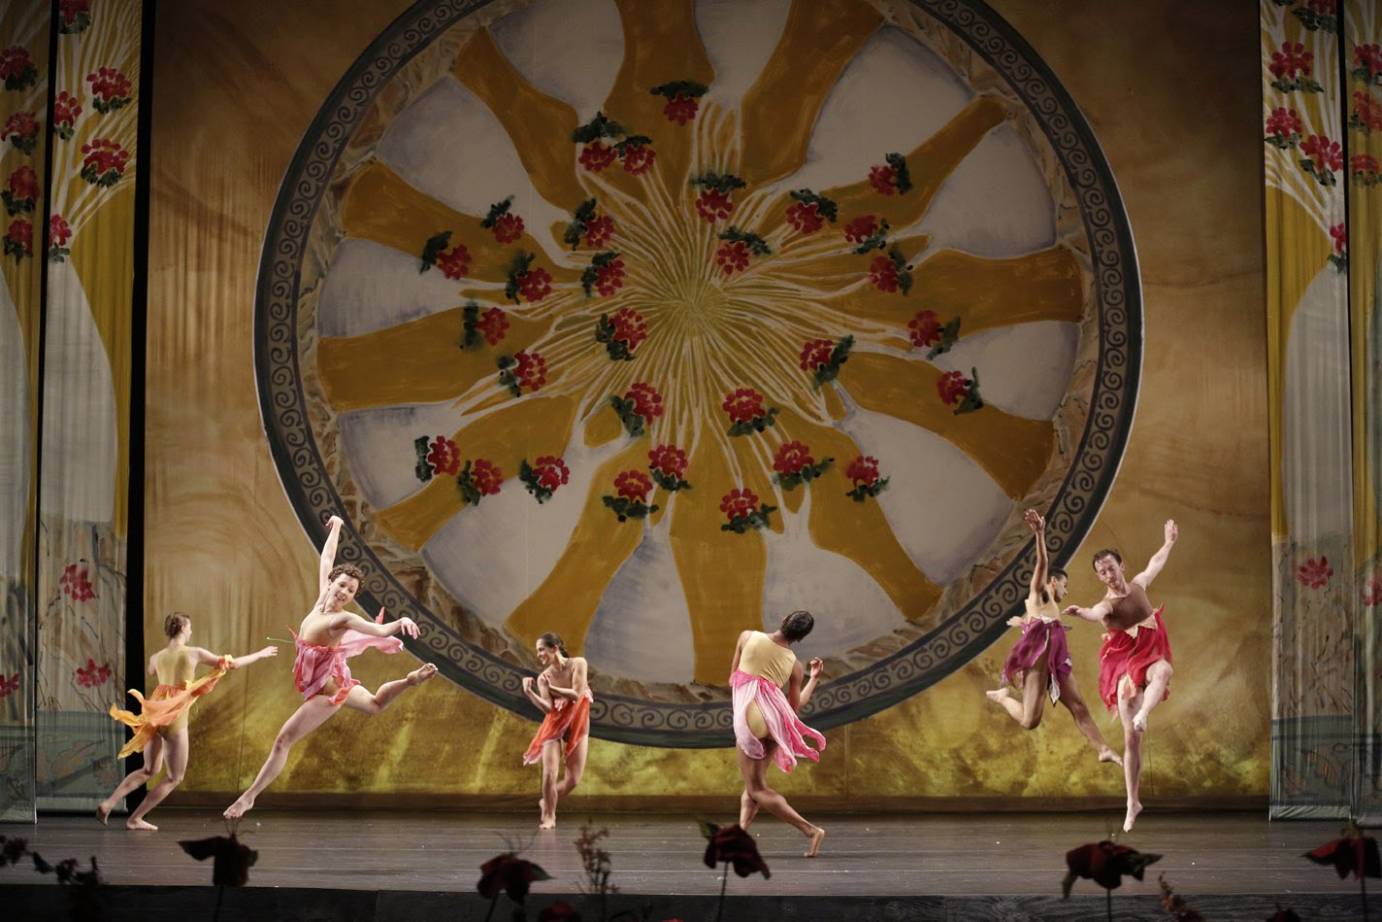 Six dancers in colorful costumes leap against an intricate gold background